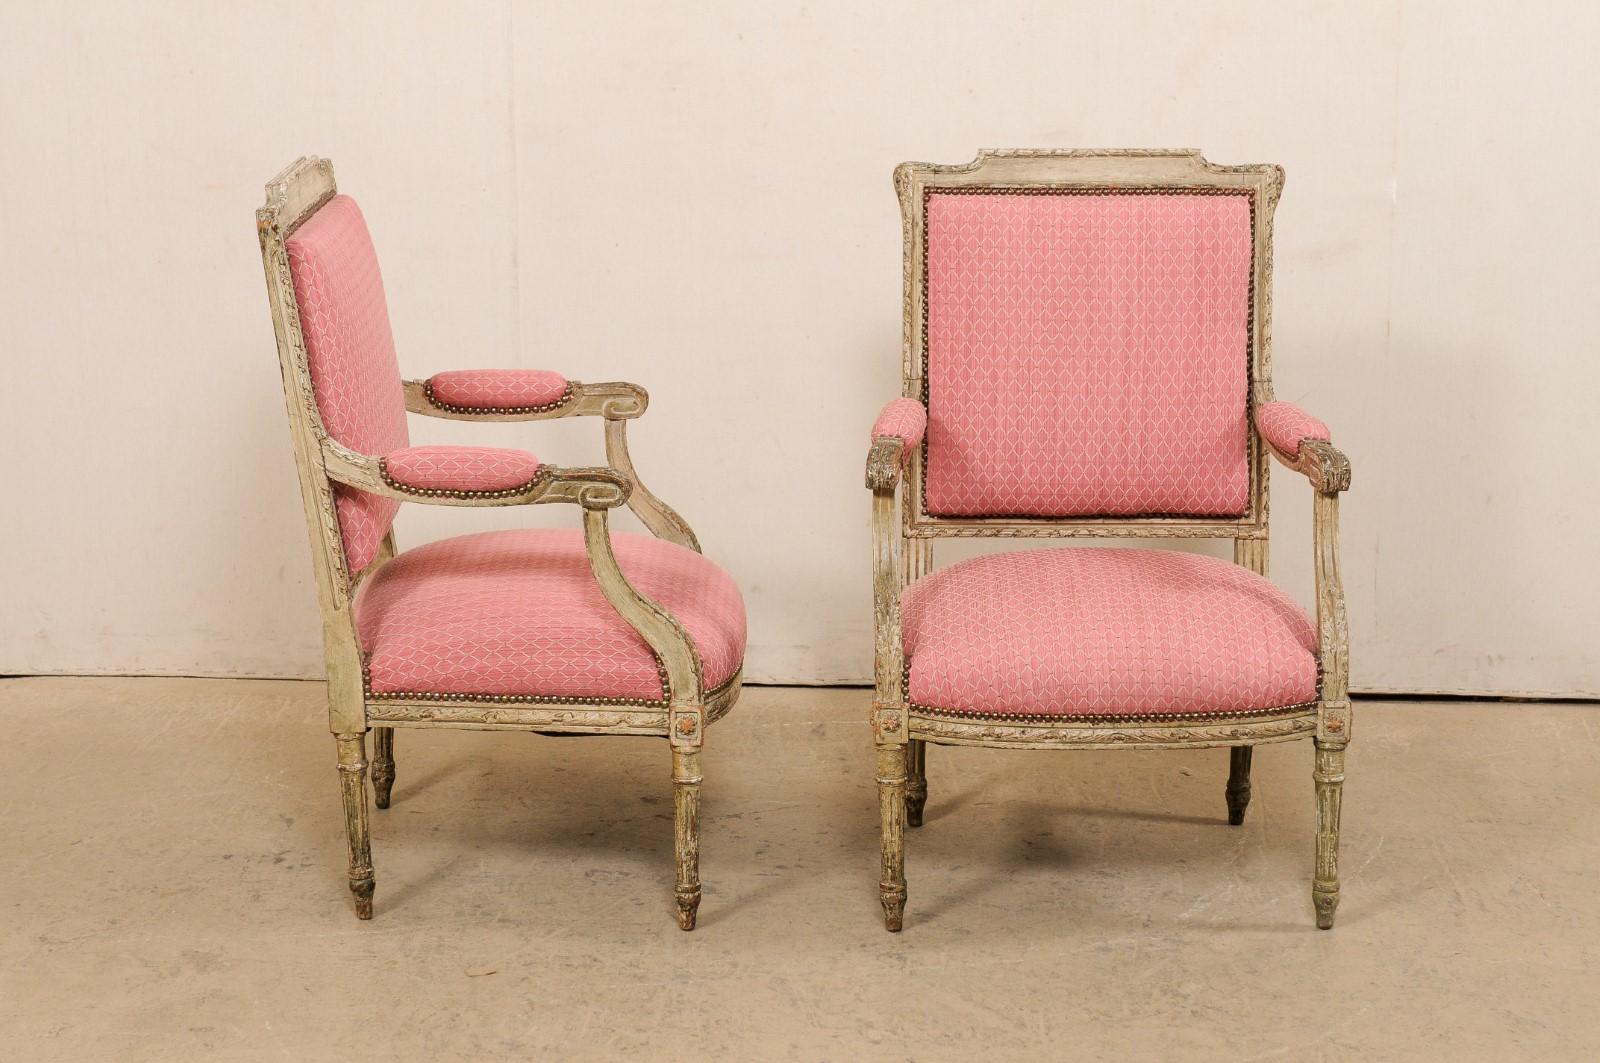 Antique French Pair of Louis XV Style Fauteuil Armchairs w/Original Wood Finish For Sale 1